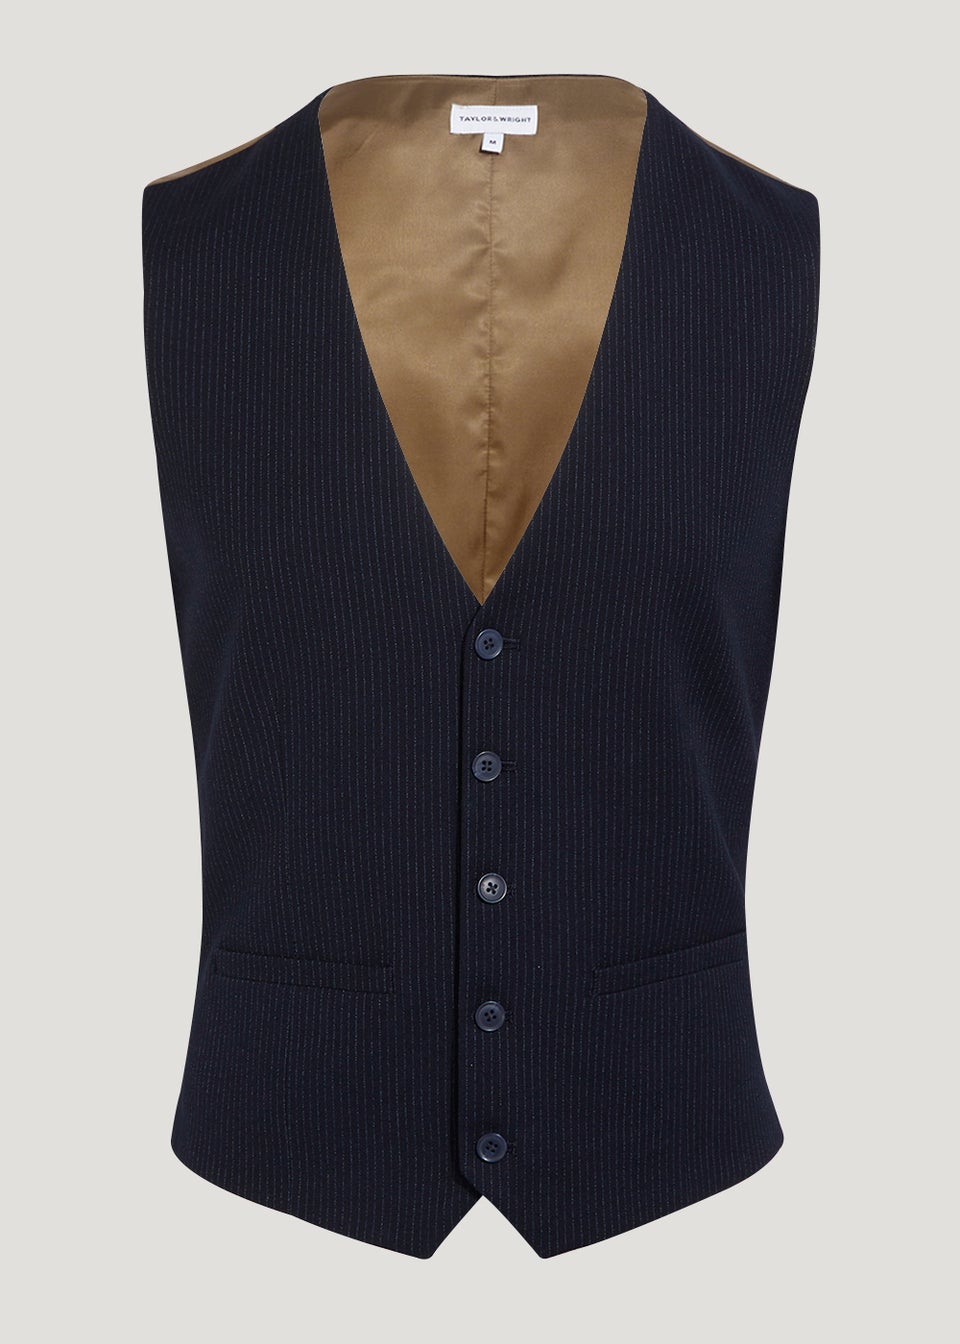 Taylor & Wright Milne Navy Skinny Fit Suit Waistcoat